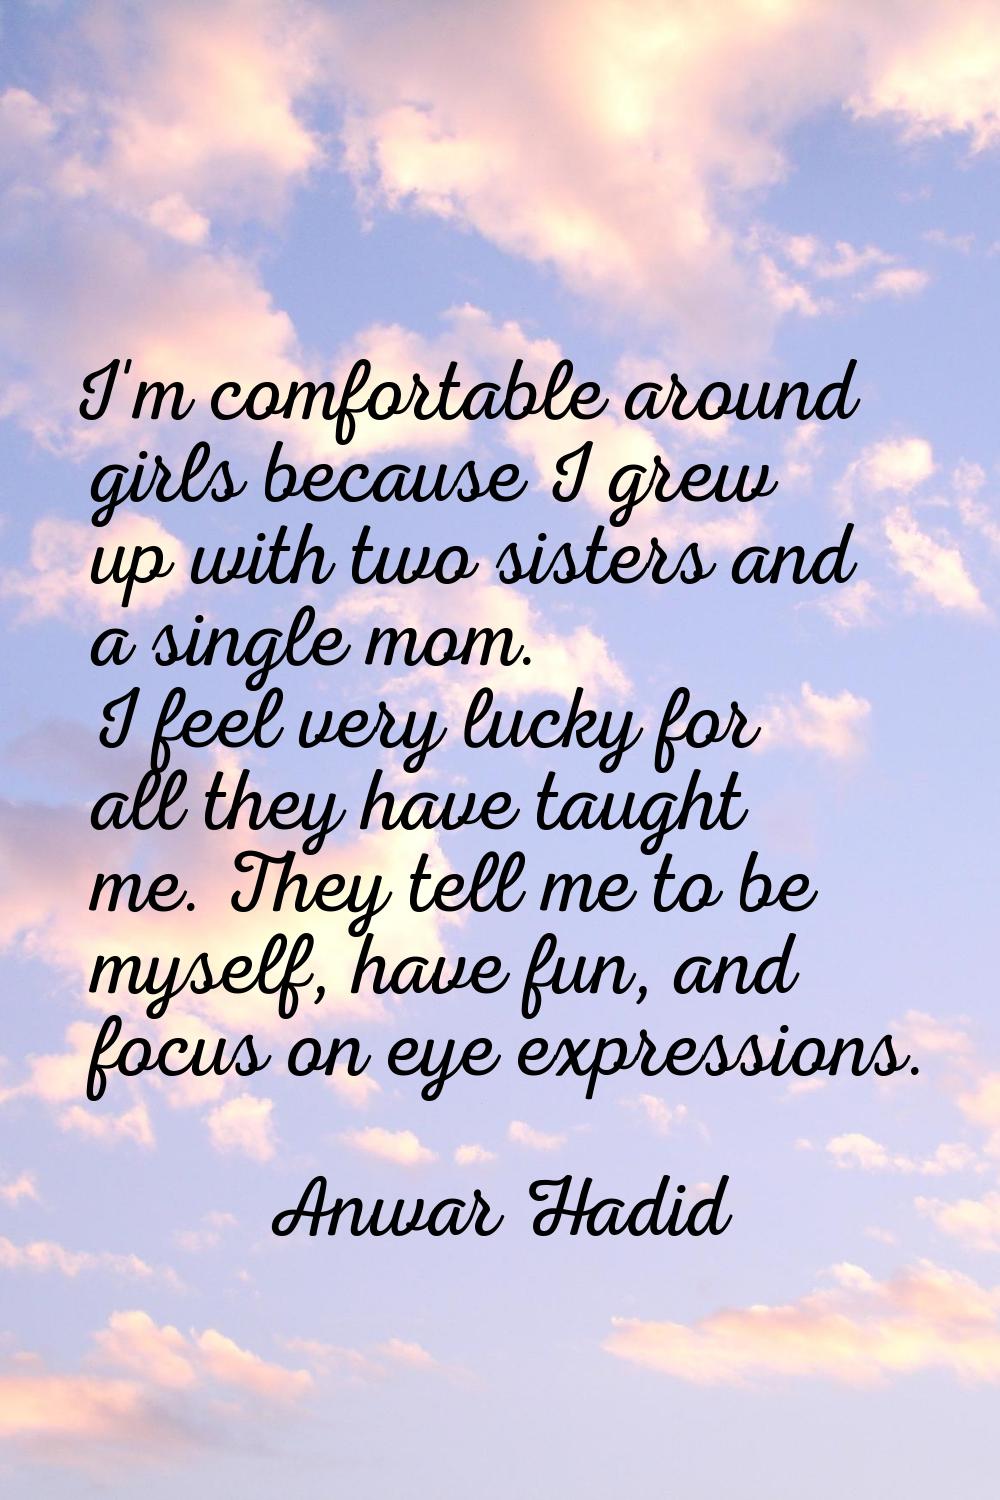 I'm comfortable around girls because I grew up with two sisters and a single mom. I feel very lucky